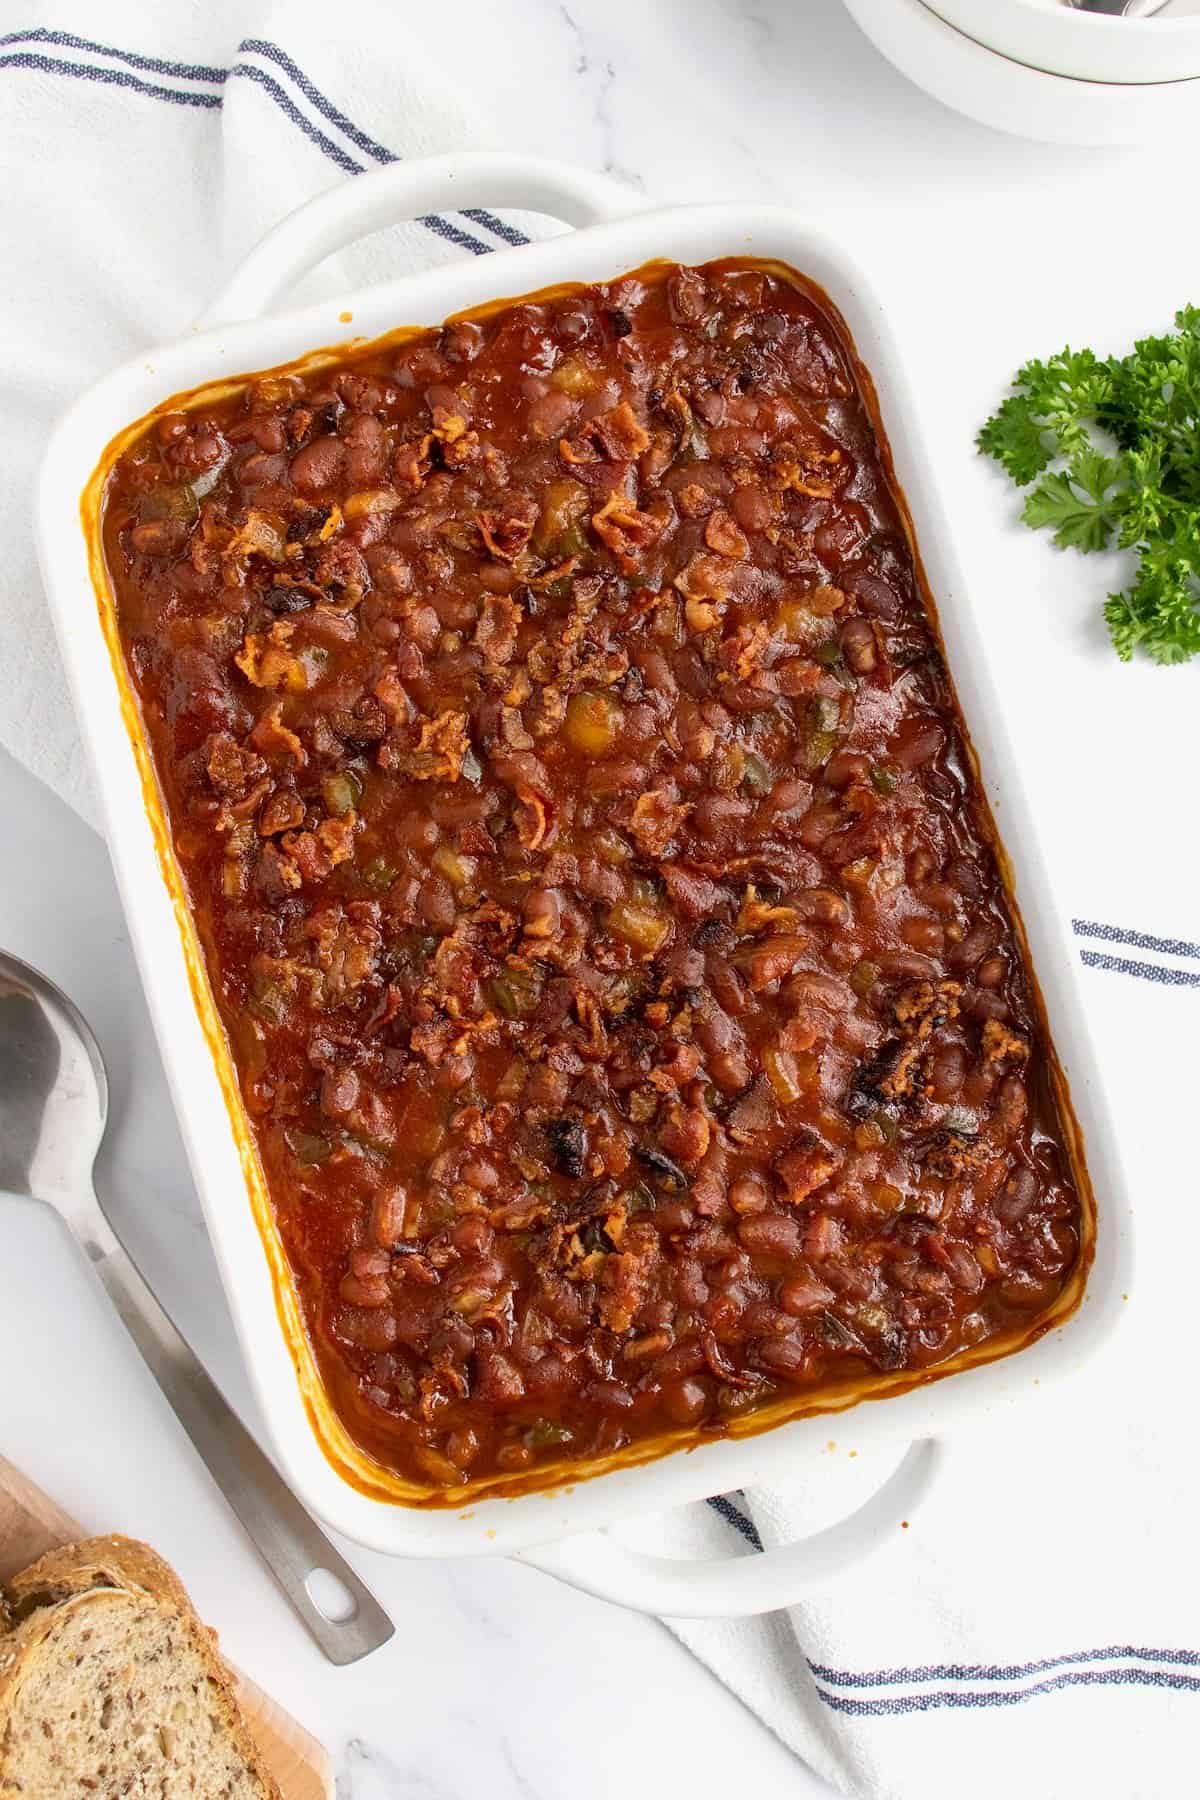 Baked Beans by The BakerMama